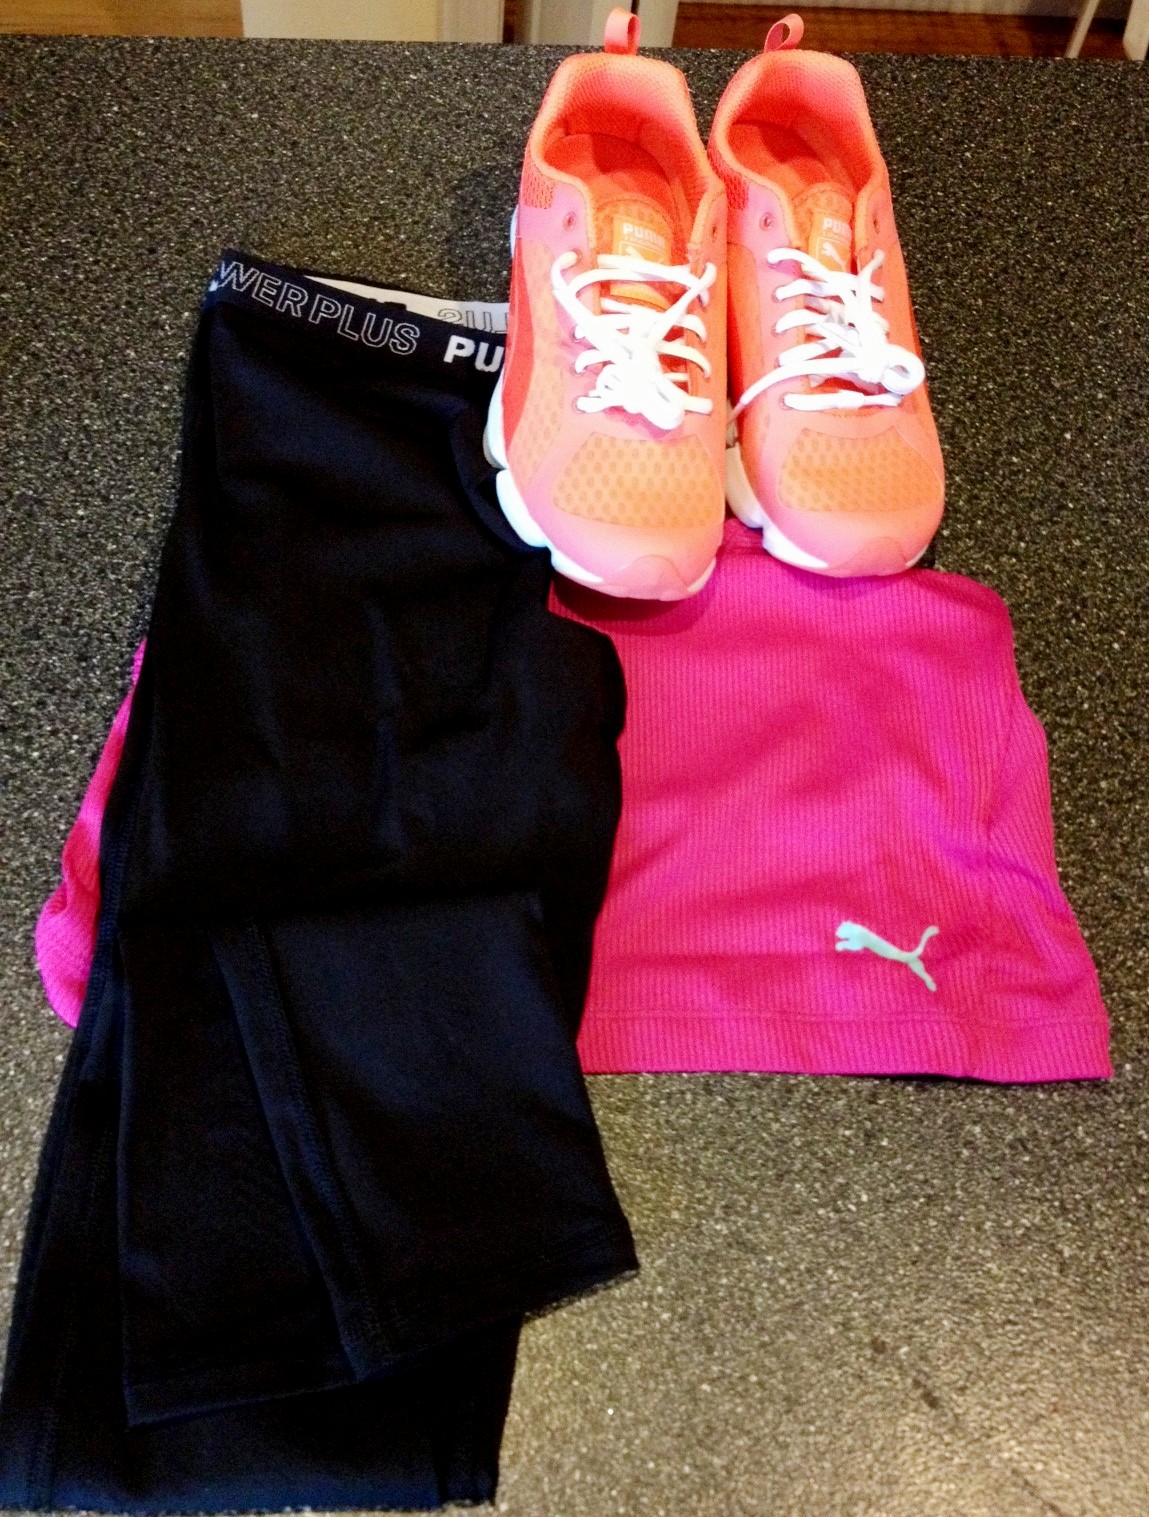 They know my signature workout gear color - pink!